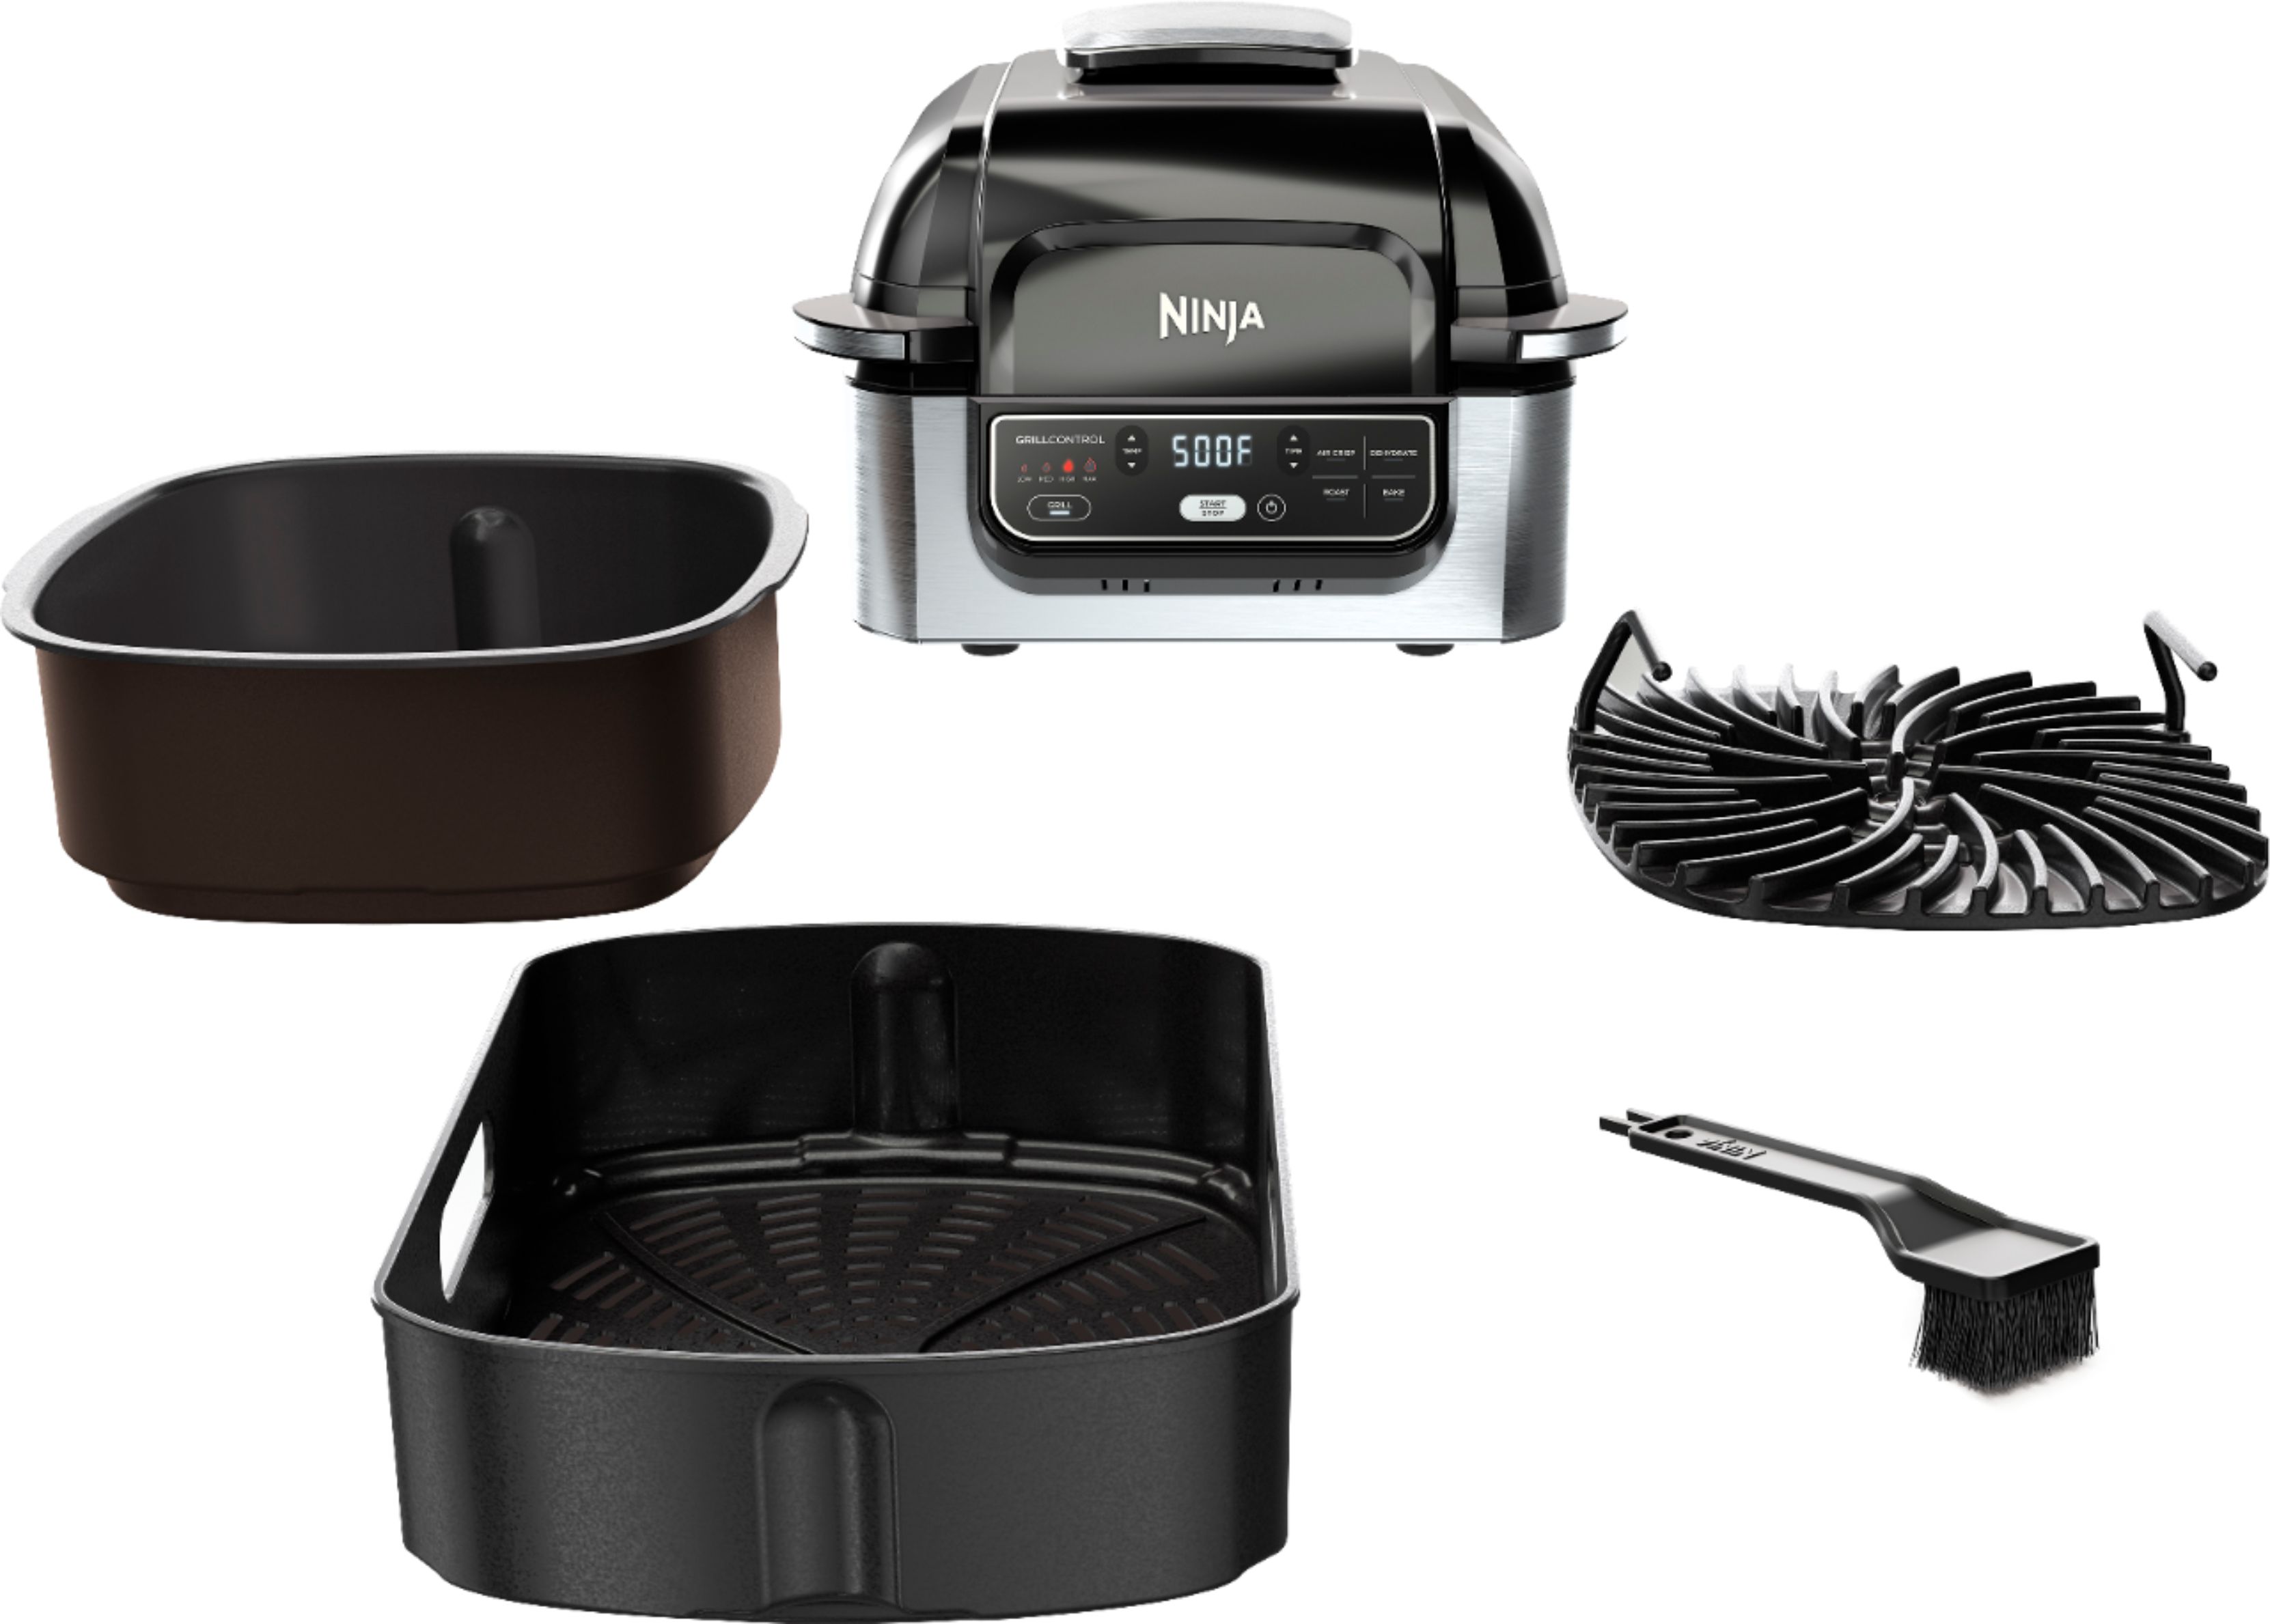  Ninja Foodi XL Pro 5-in-1 Indoor Grill & Griddle with 4-Quart  Air Fryer, and Bake, IG600 : Home & Kitchen